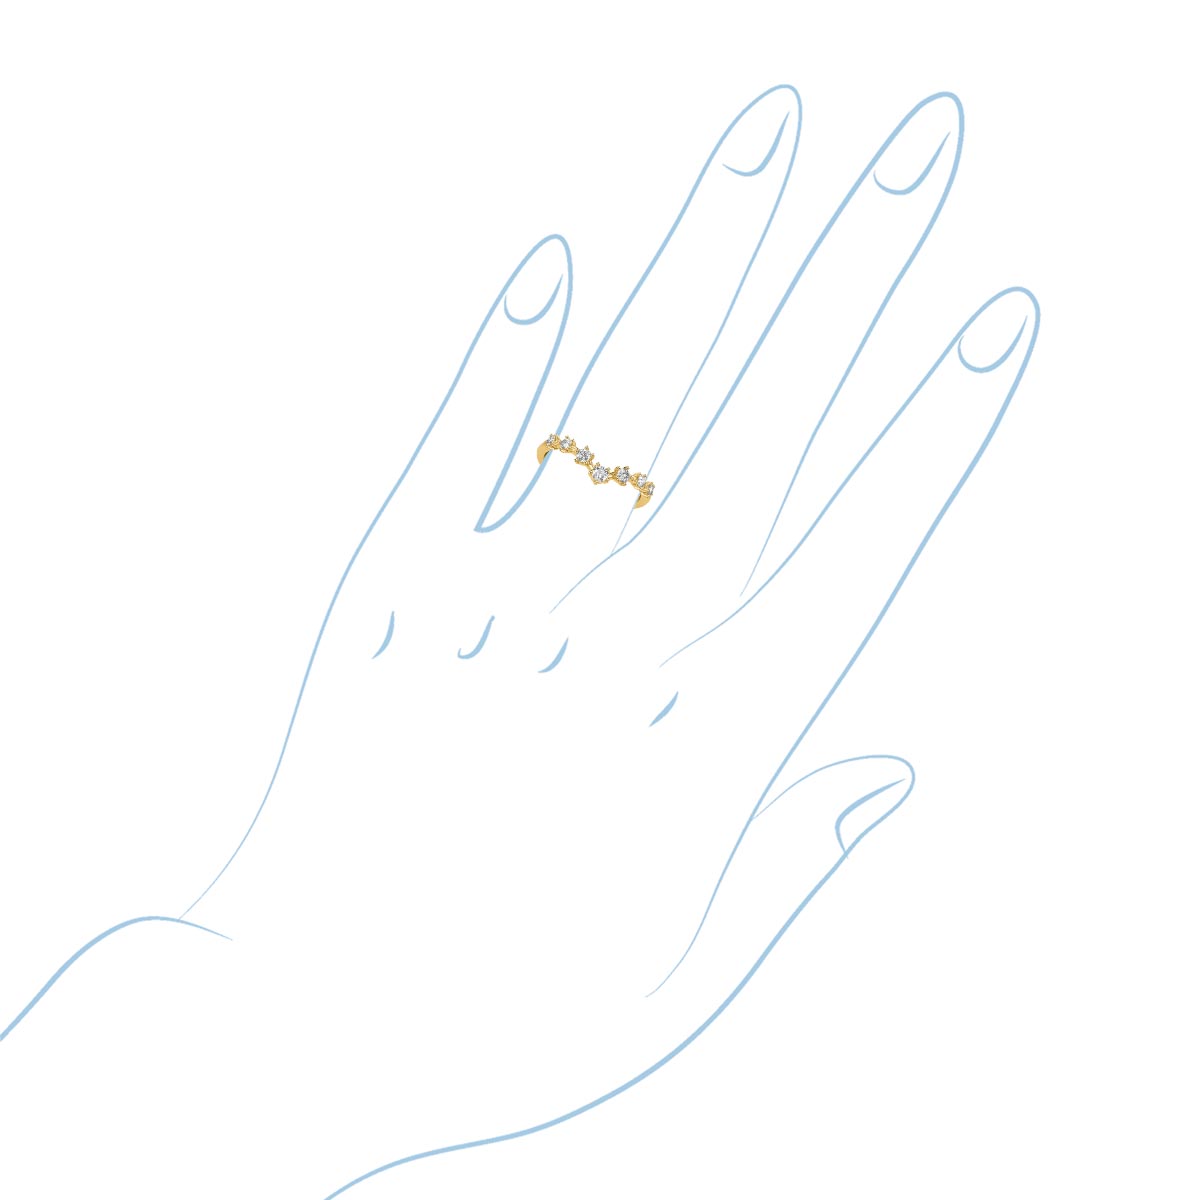 Diamond V-Shaped Band in 14kt Yellow Gold (1/3ct tw)